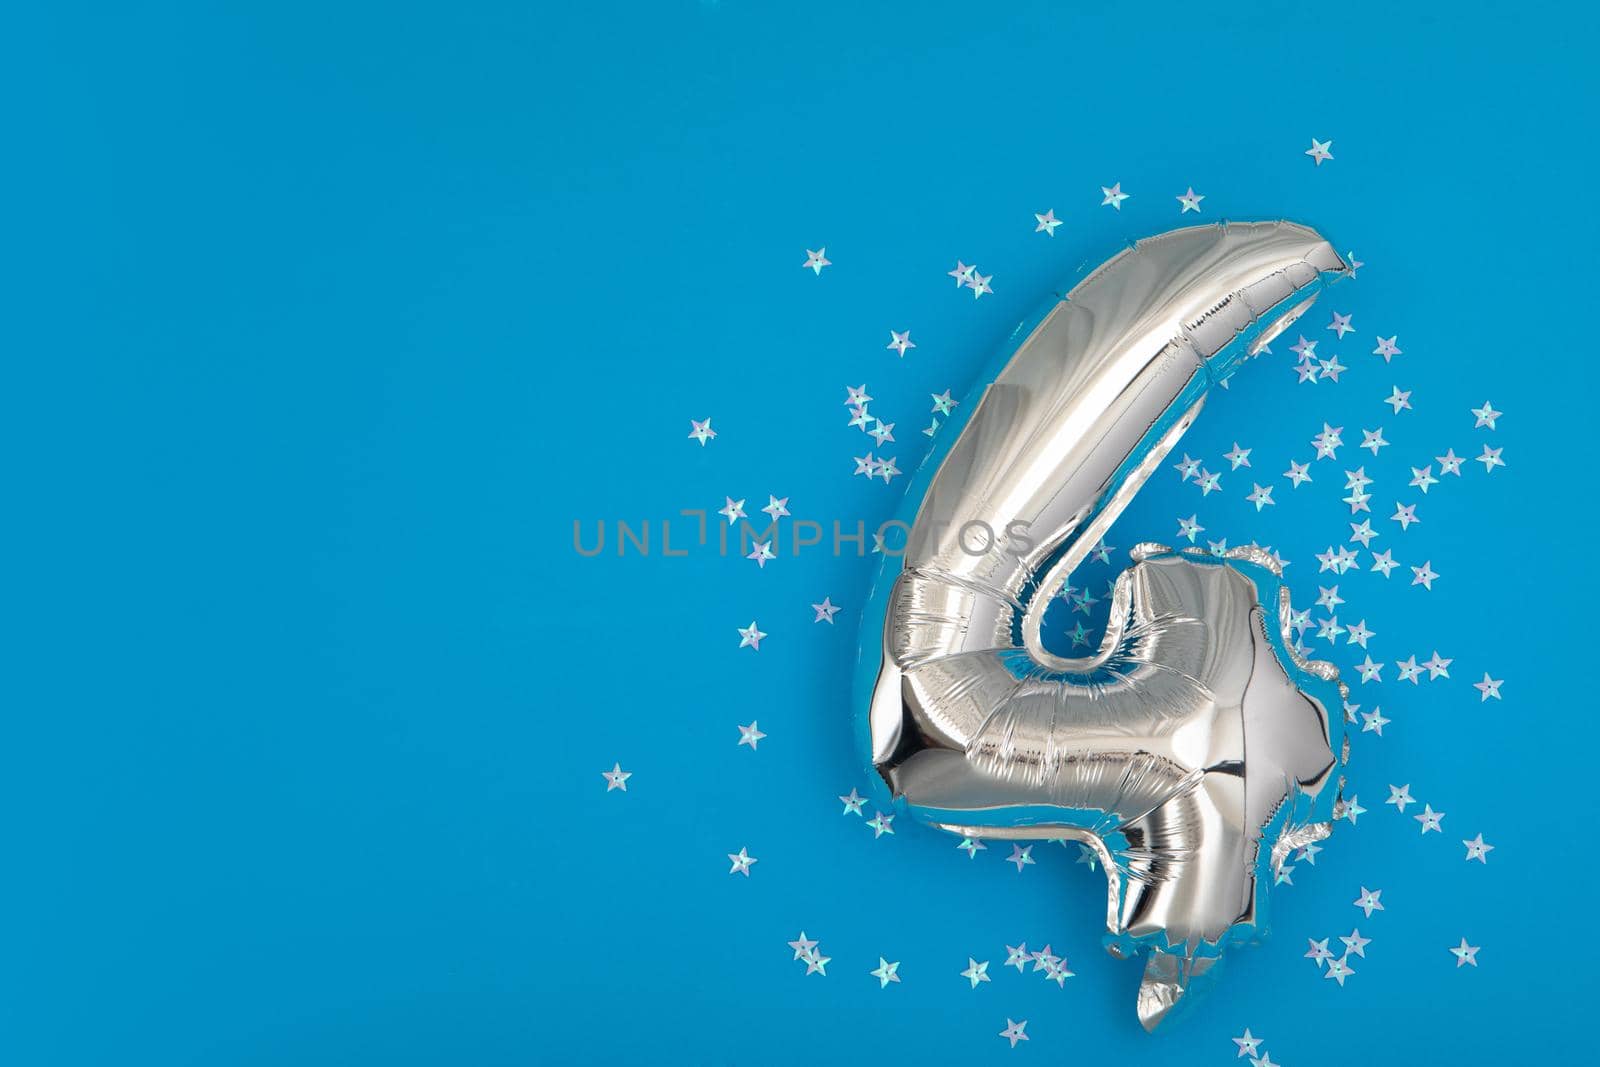 Silver balloon 4 on a blue background with confetti stars by Demkat